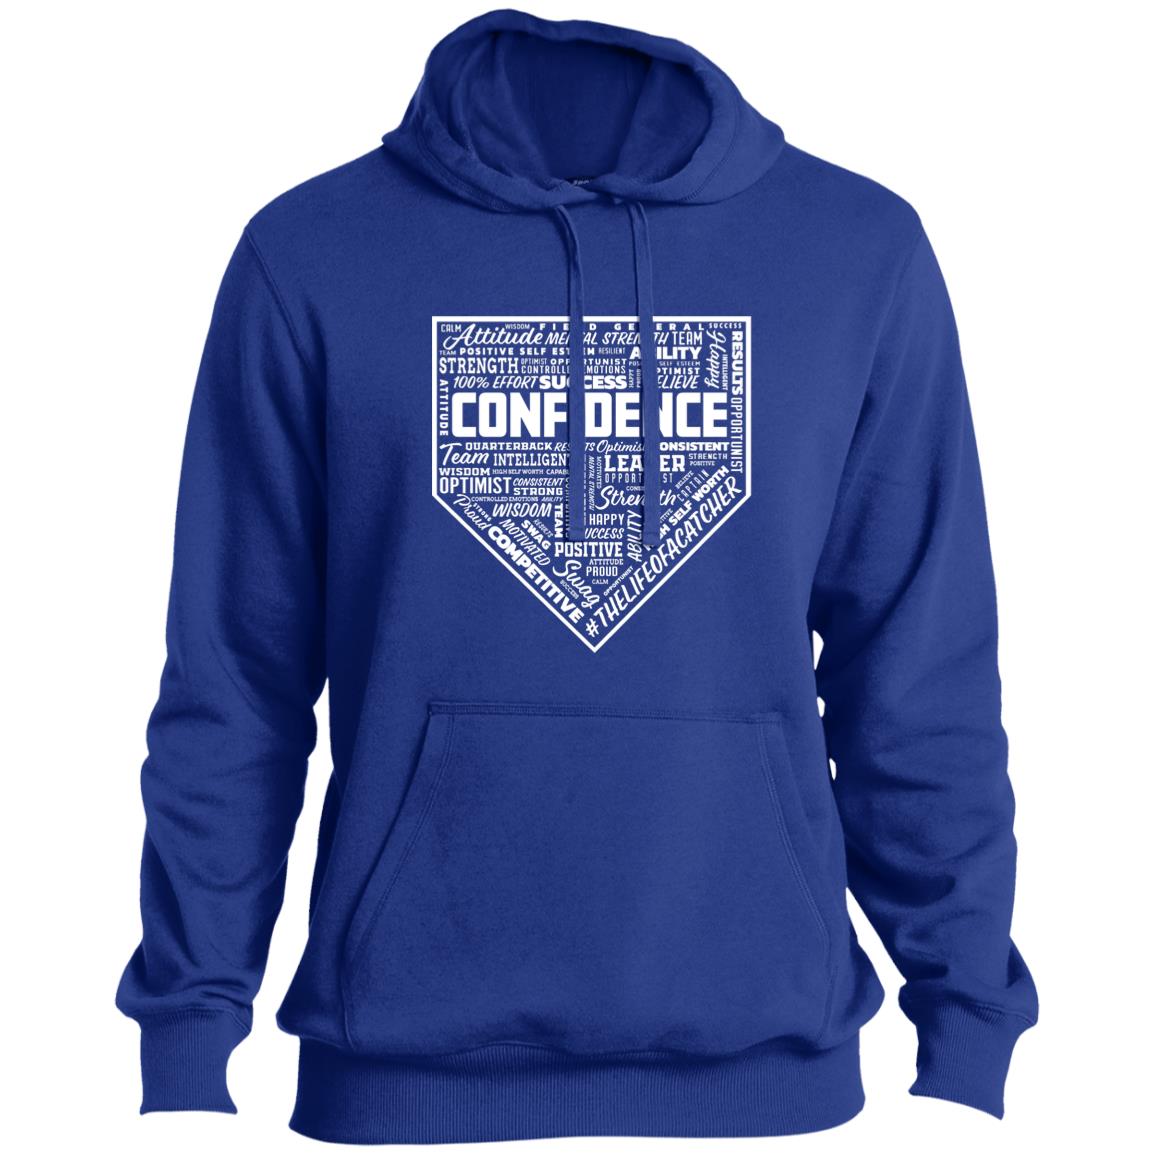 The Catching Guy Catcher Confidence Pullover Hoodie in royal blue